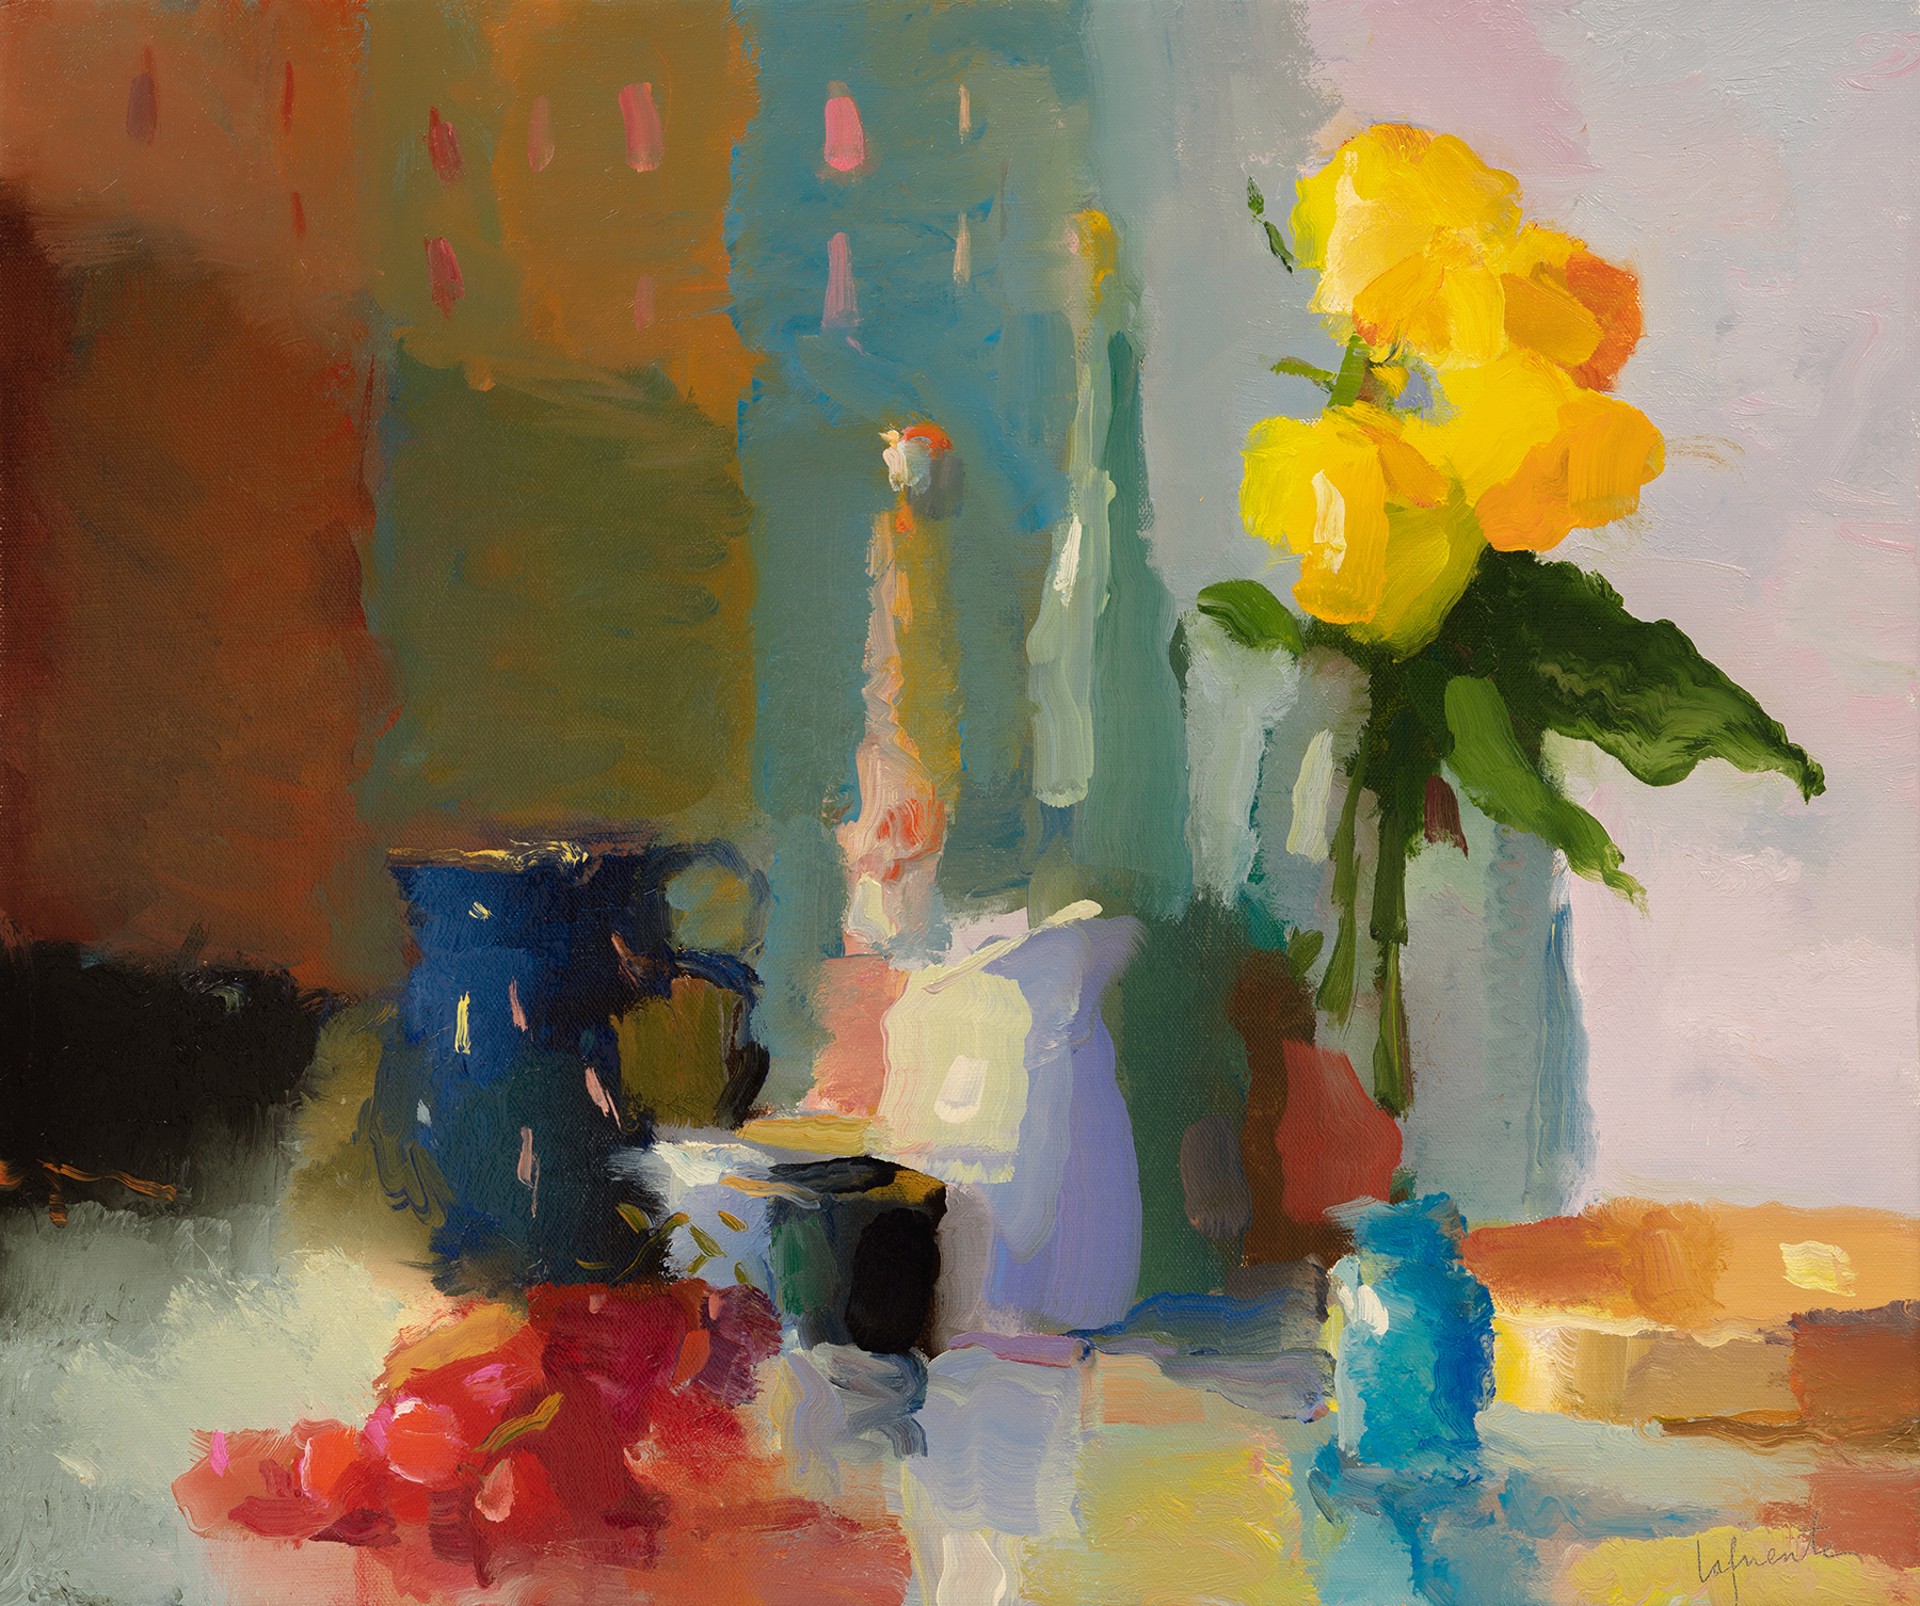 GRAPES, YELLOW ROSES AND PITCHERS by CHRISTINE LAFUENTE